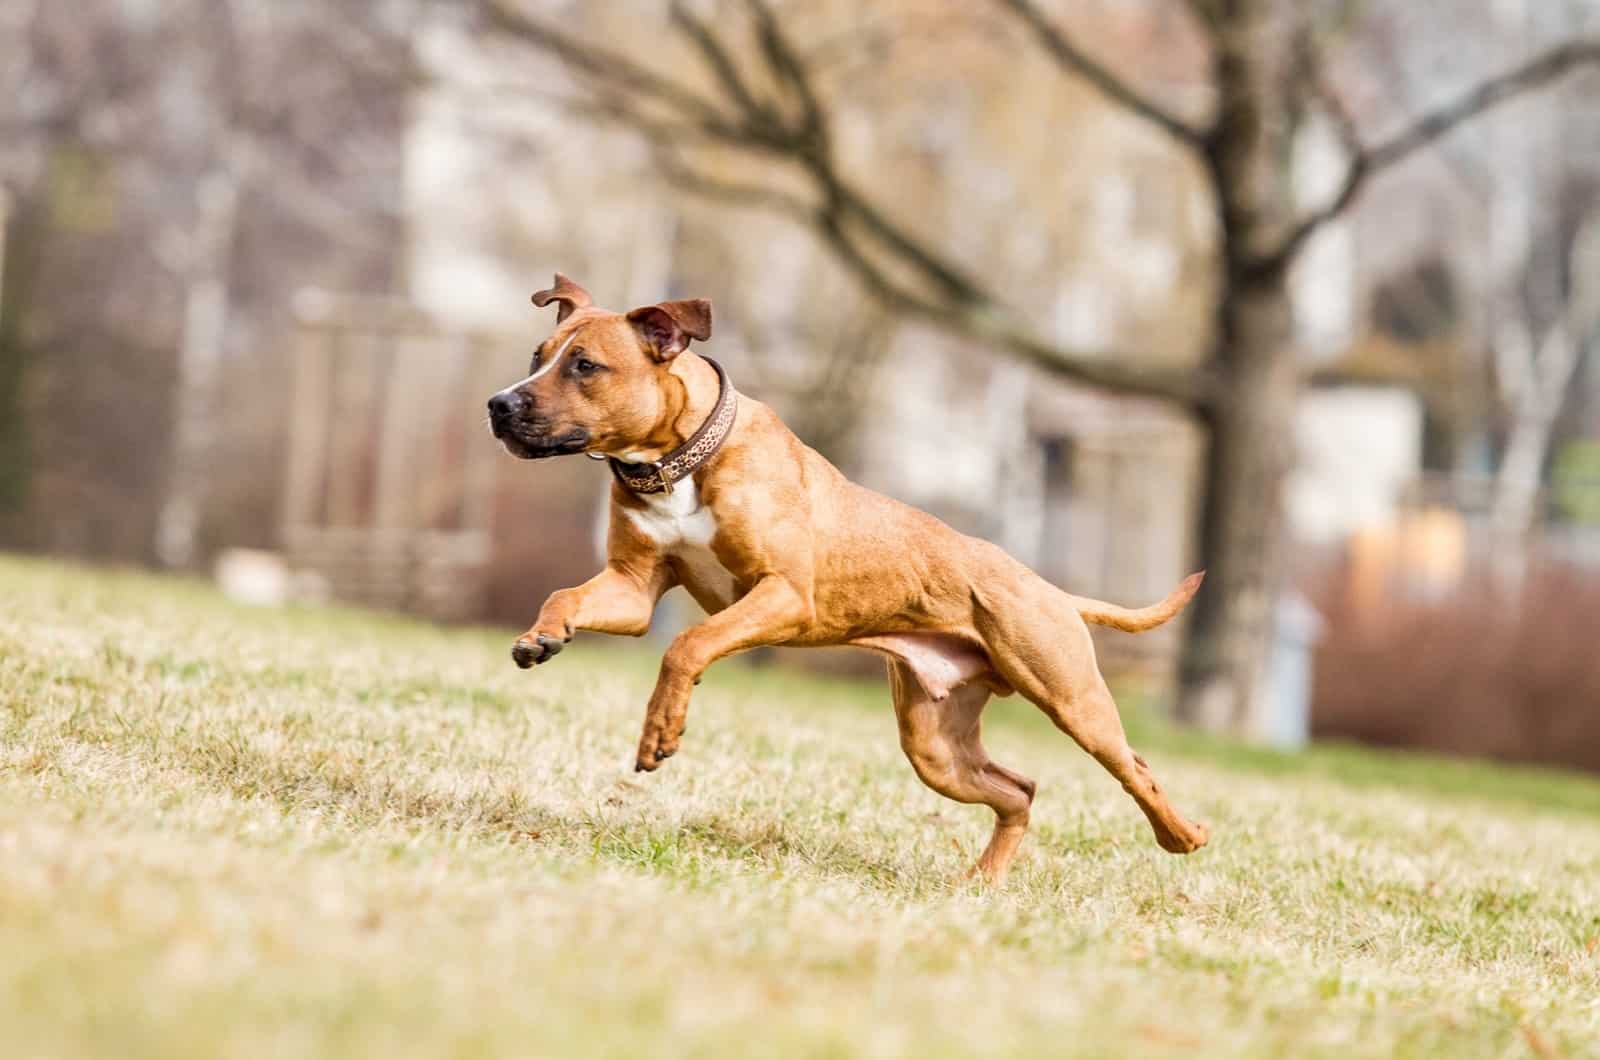 Should You Use Shock Collars On Pitbulls Or Not?